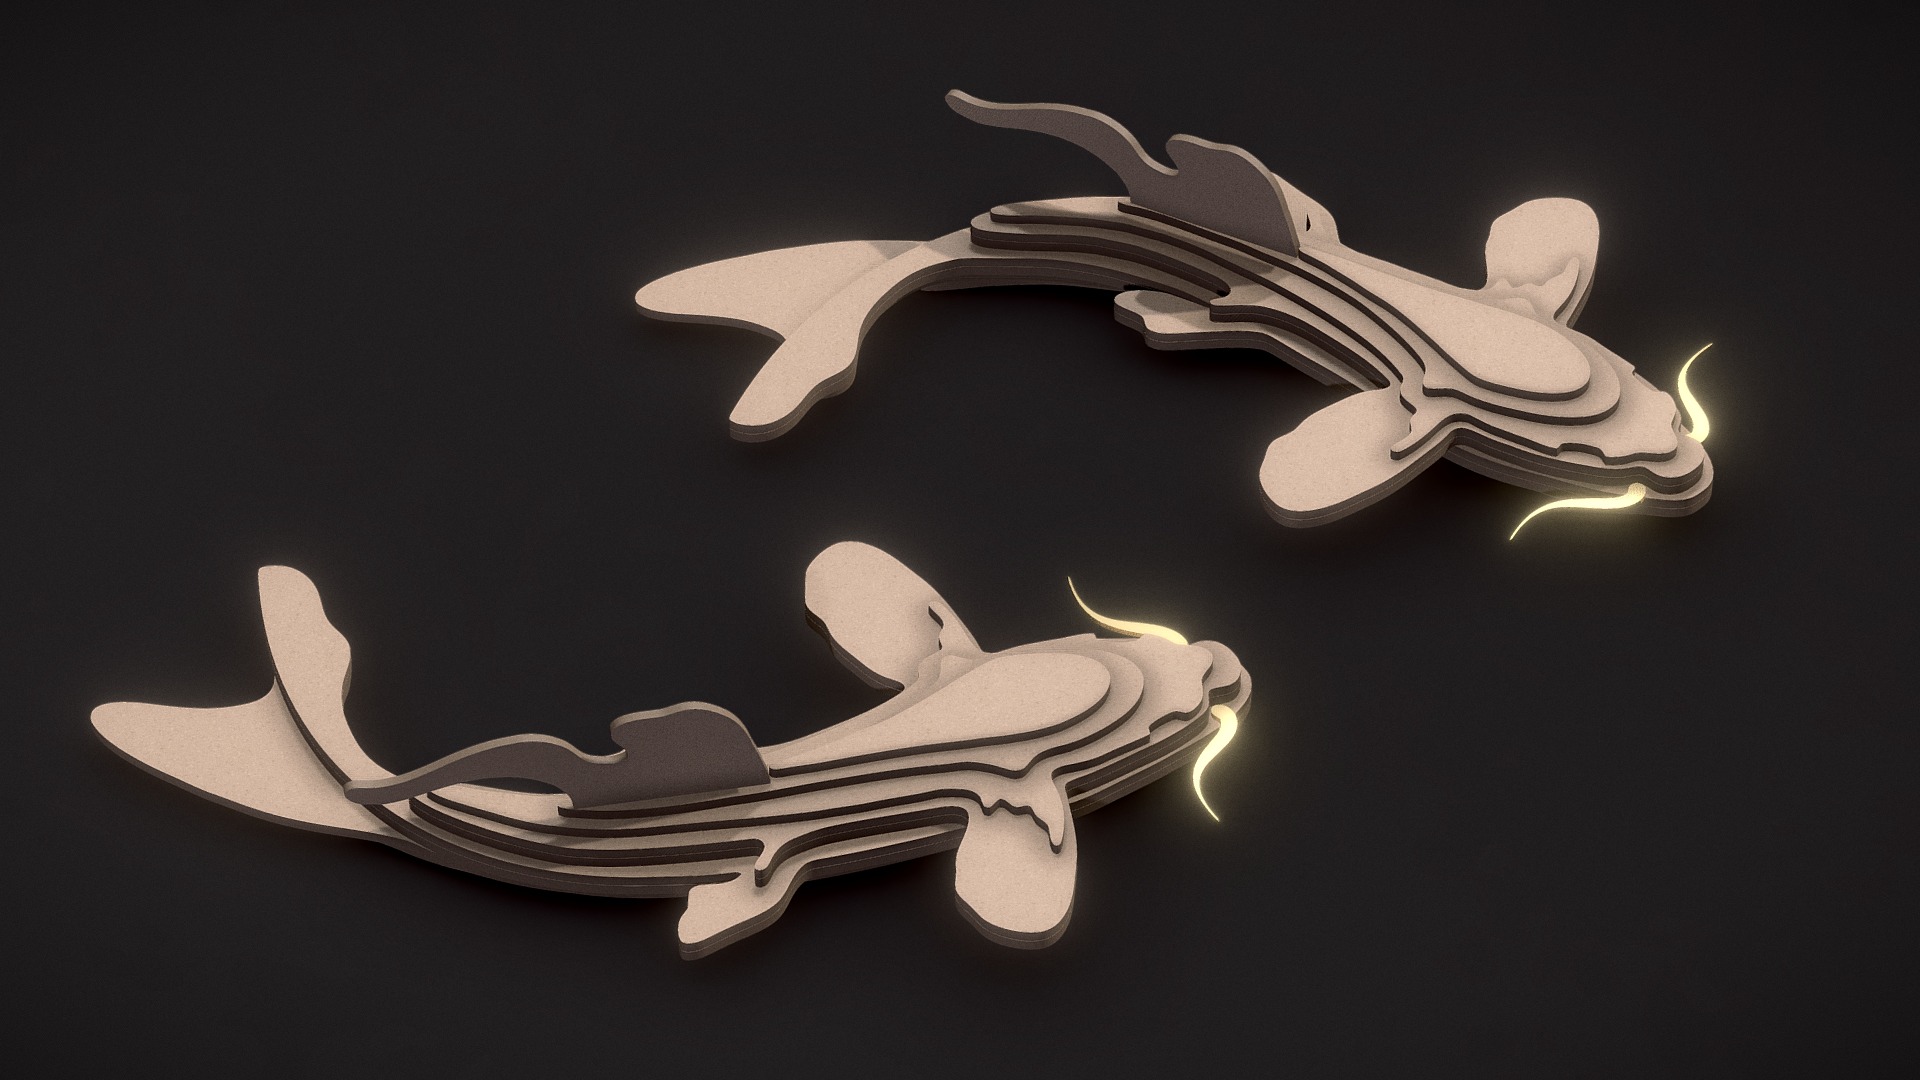 3D model KOI FISH –  PARAMETRIC WOOD DESIGN CNC CUTTING - This is a 3D model of the KOI FISH -  PARAMETRIC WOOD DESIGN CNC CUTTING. The 3D model is about a pair of silver and gold shoes.